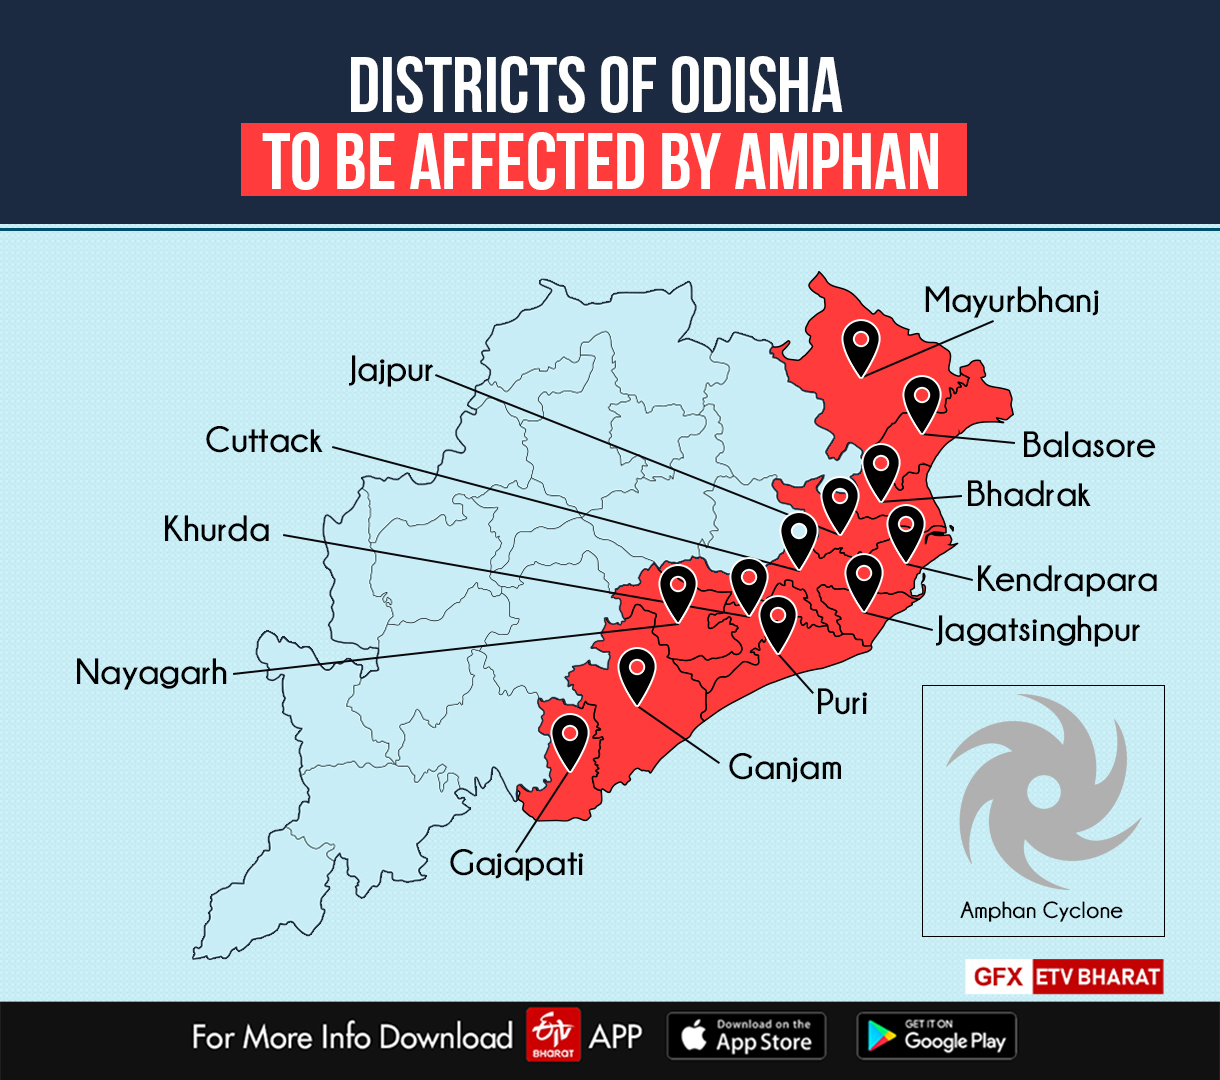 Districts in Odisha affected by Amphan